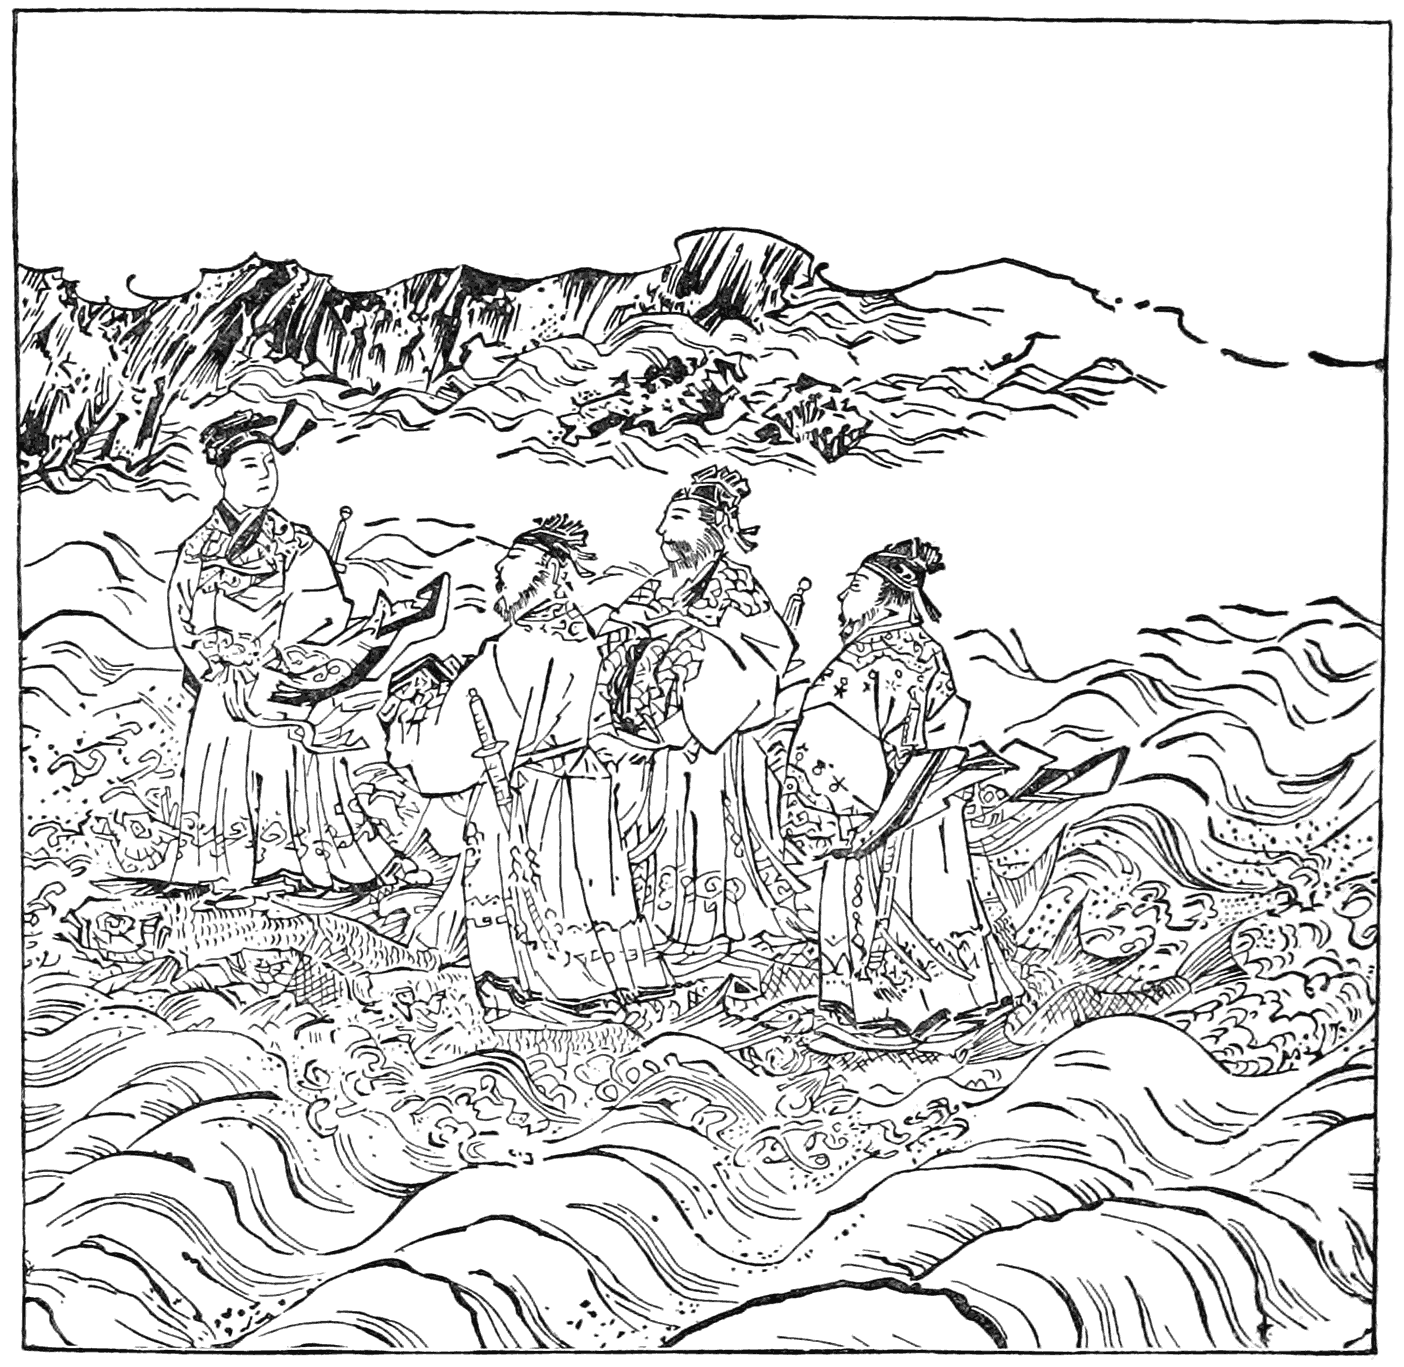 The Founder of Fuyu Crossing the Sungari River. (Drawn by G. Hashimoto, Yedo, 1853.)